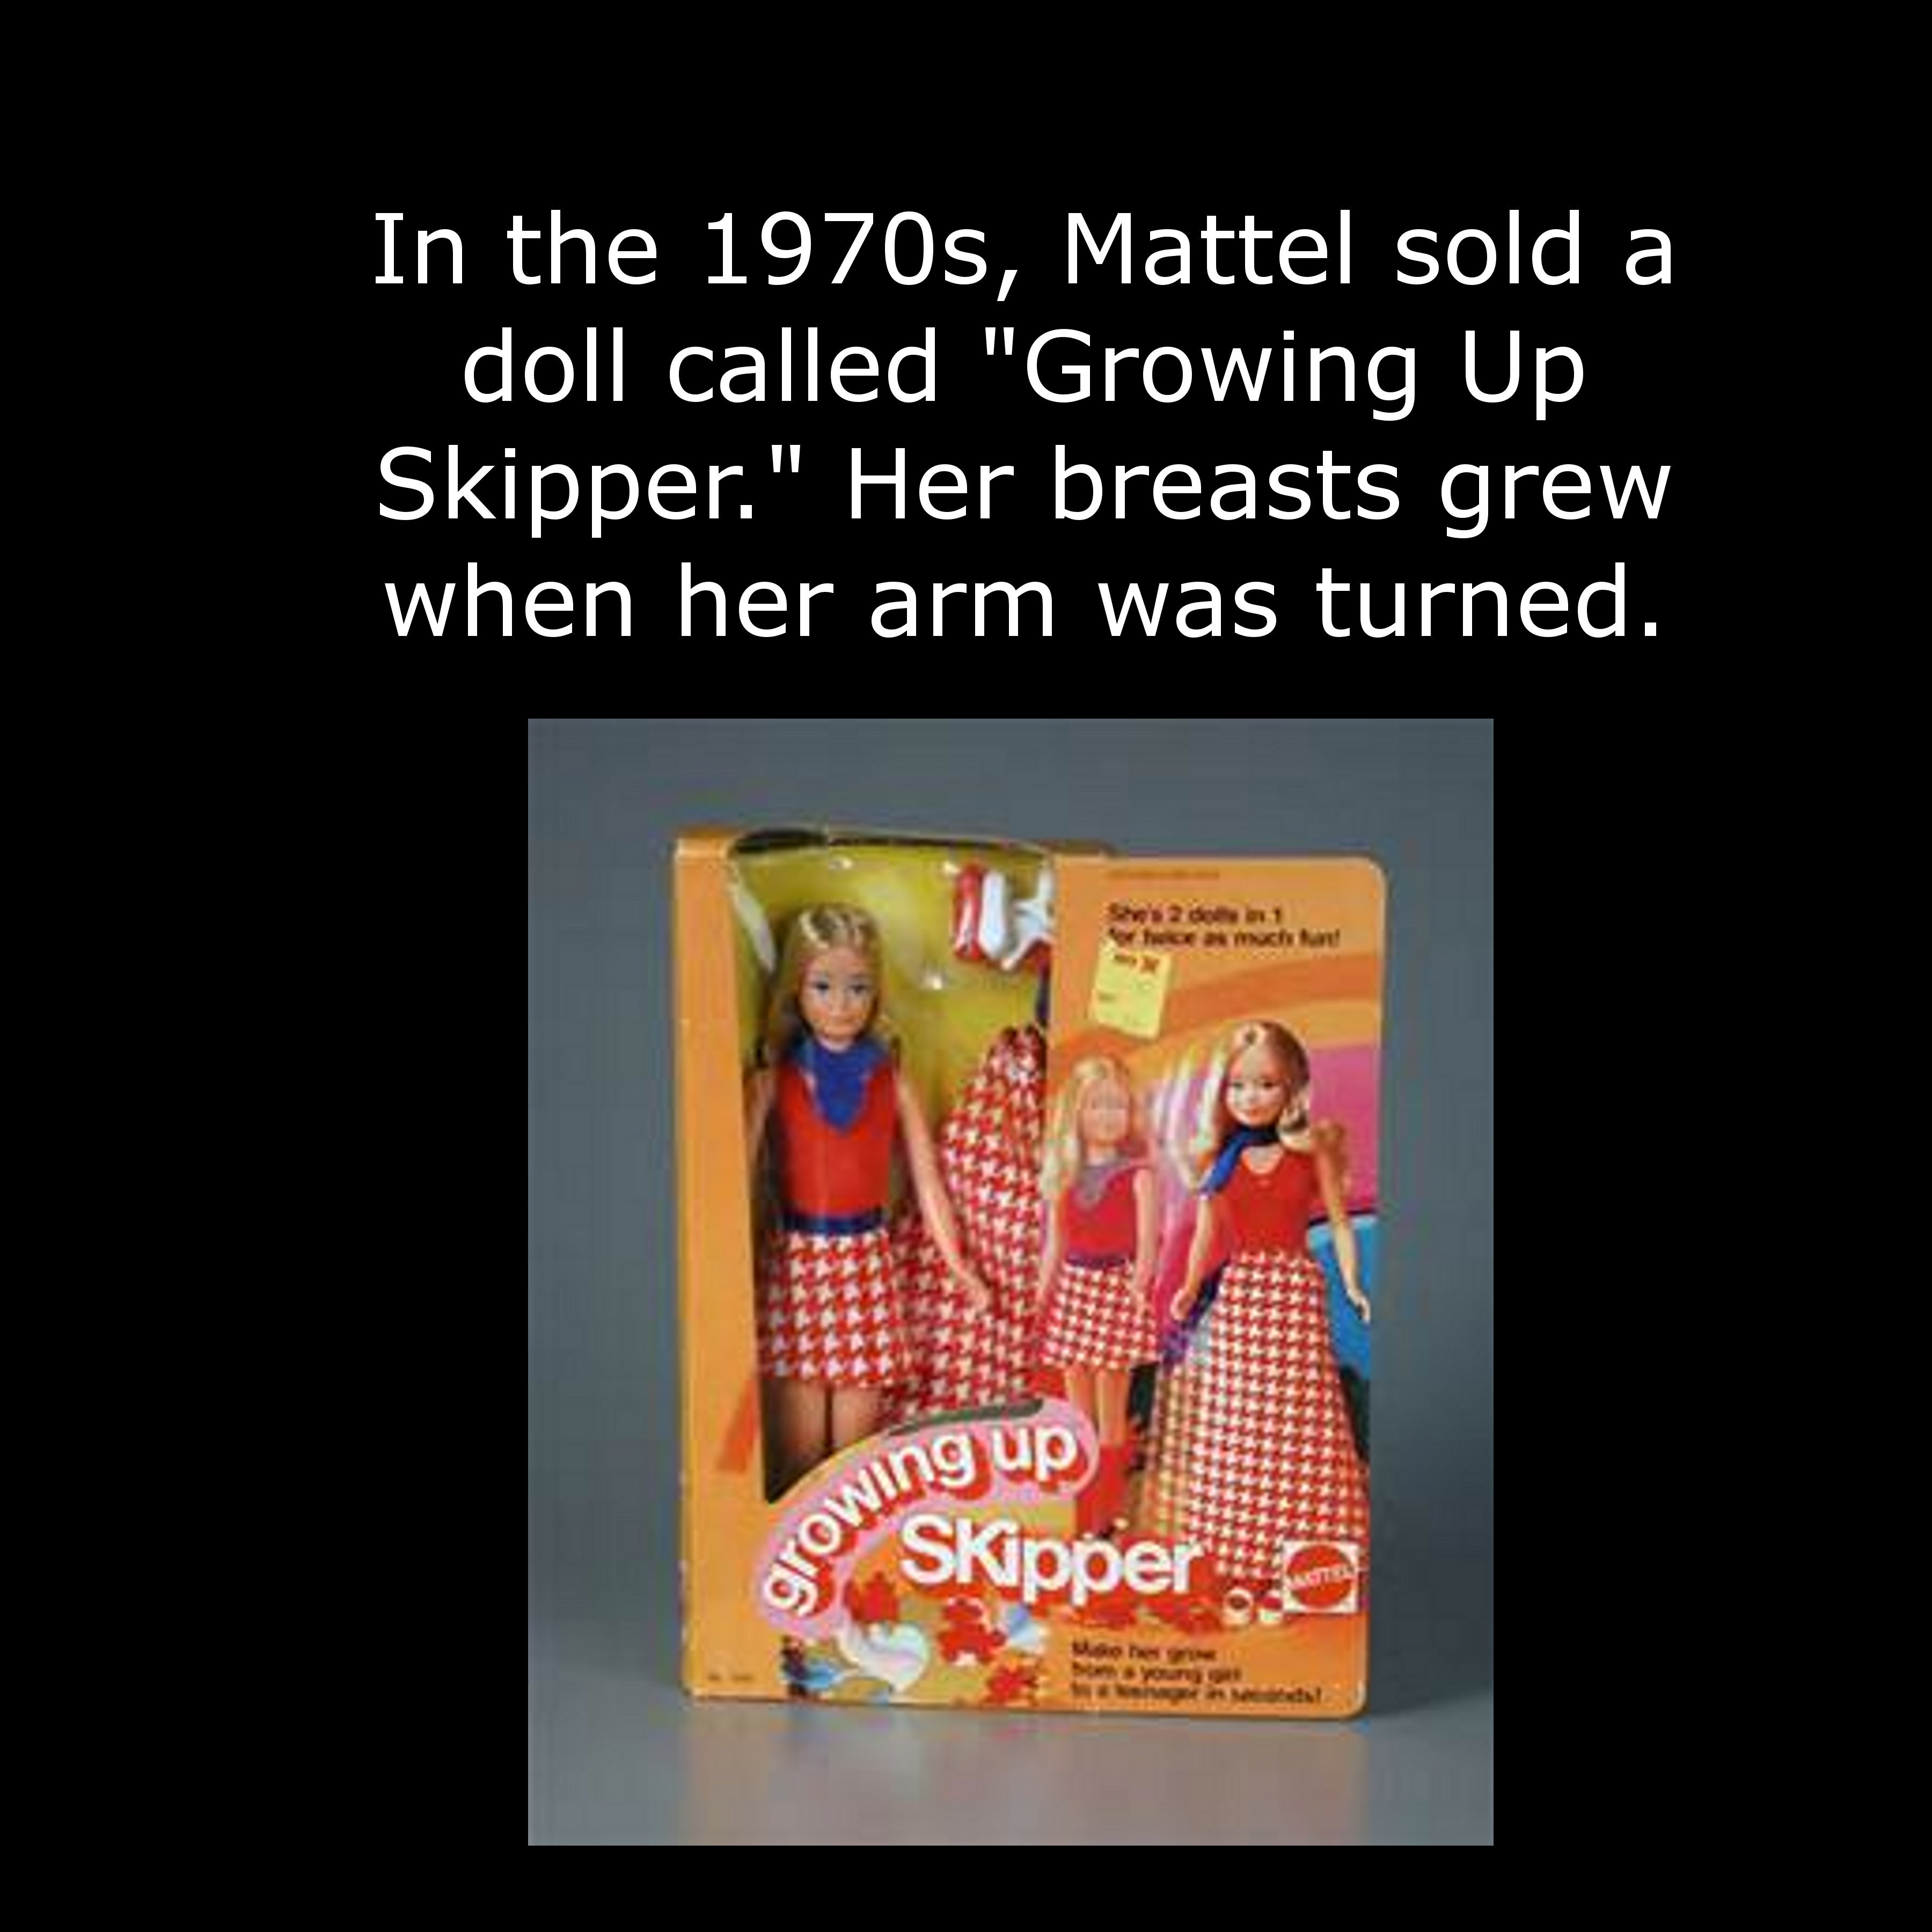 grow Skipper In the 1970s, Mattel sold a doll called "Growing Up Skipper." Her breasts grew when her arm was turned. up